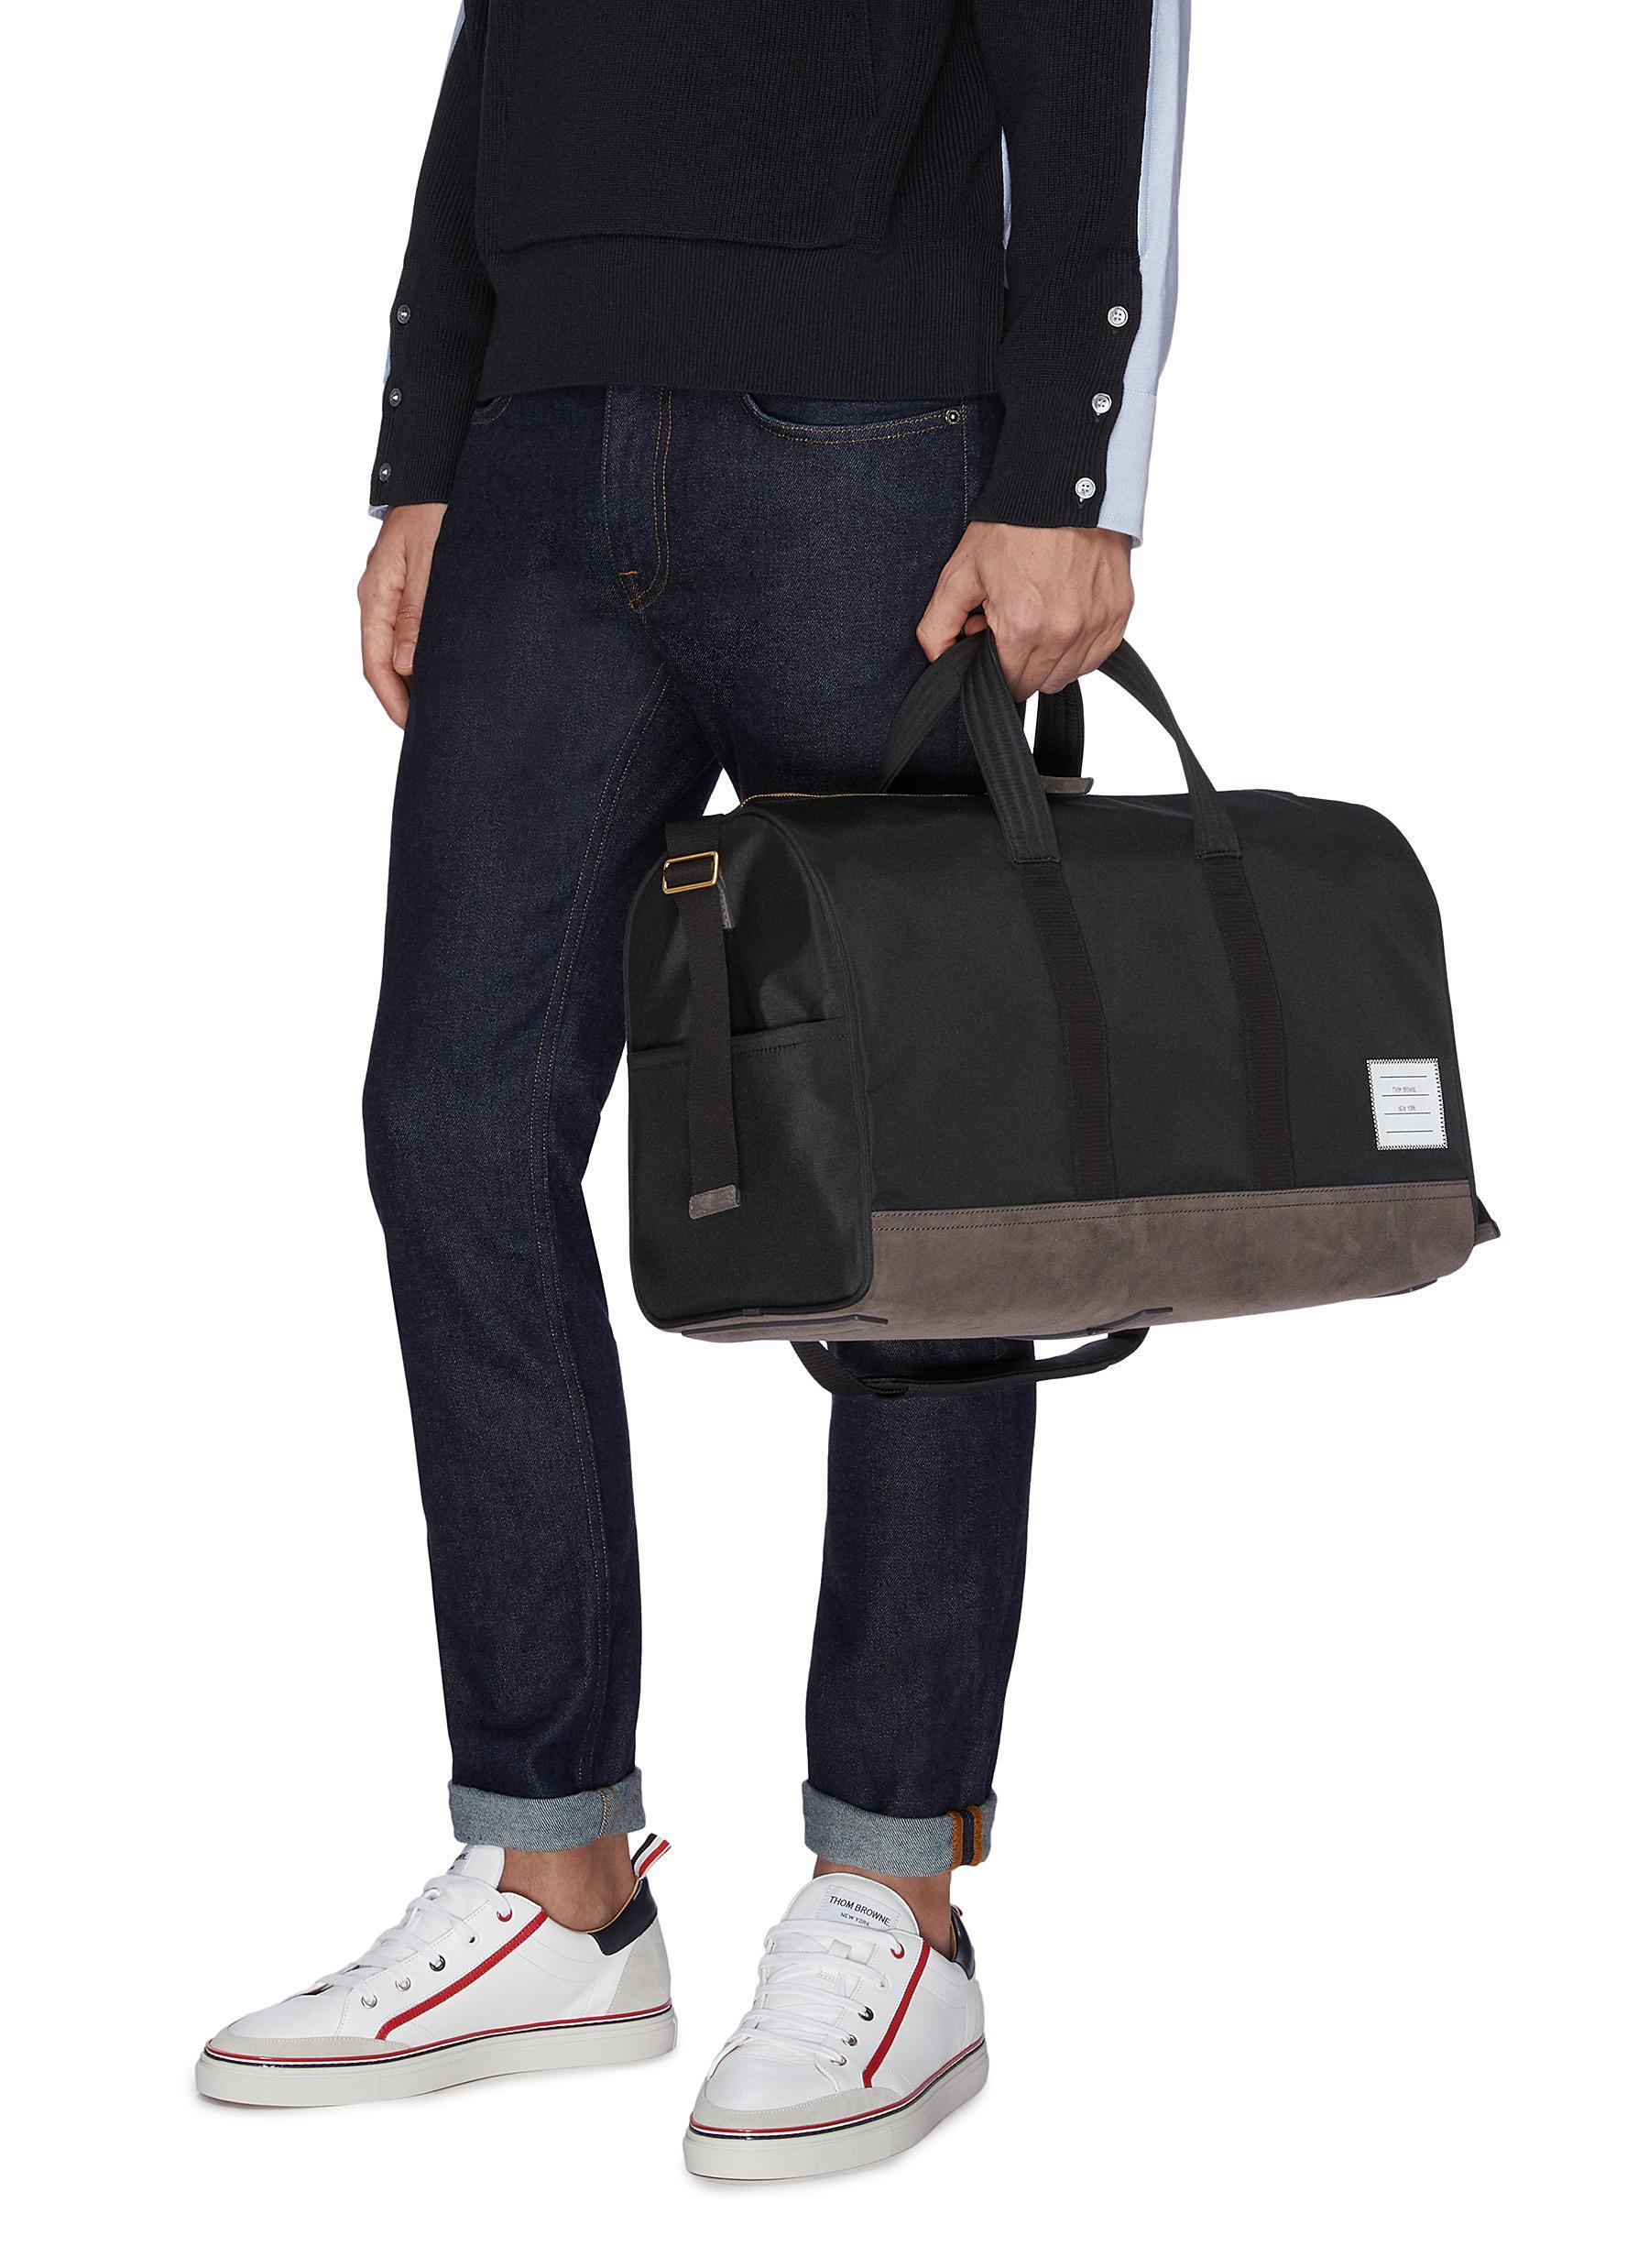 Thom Browne Synthetic Nylon Duffle Bag in Black for Men - Lyst